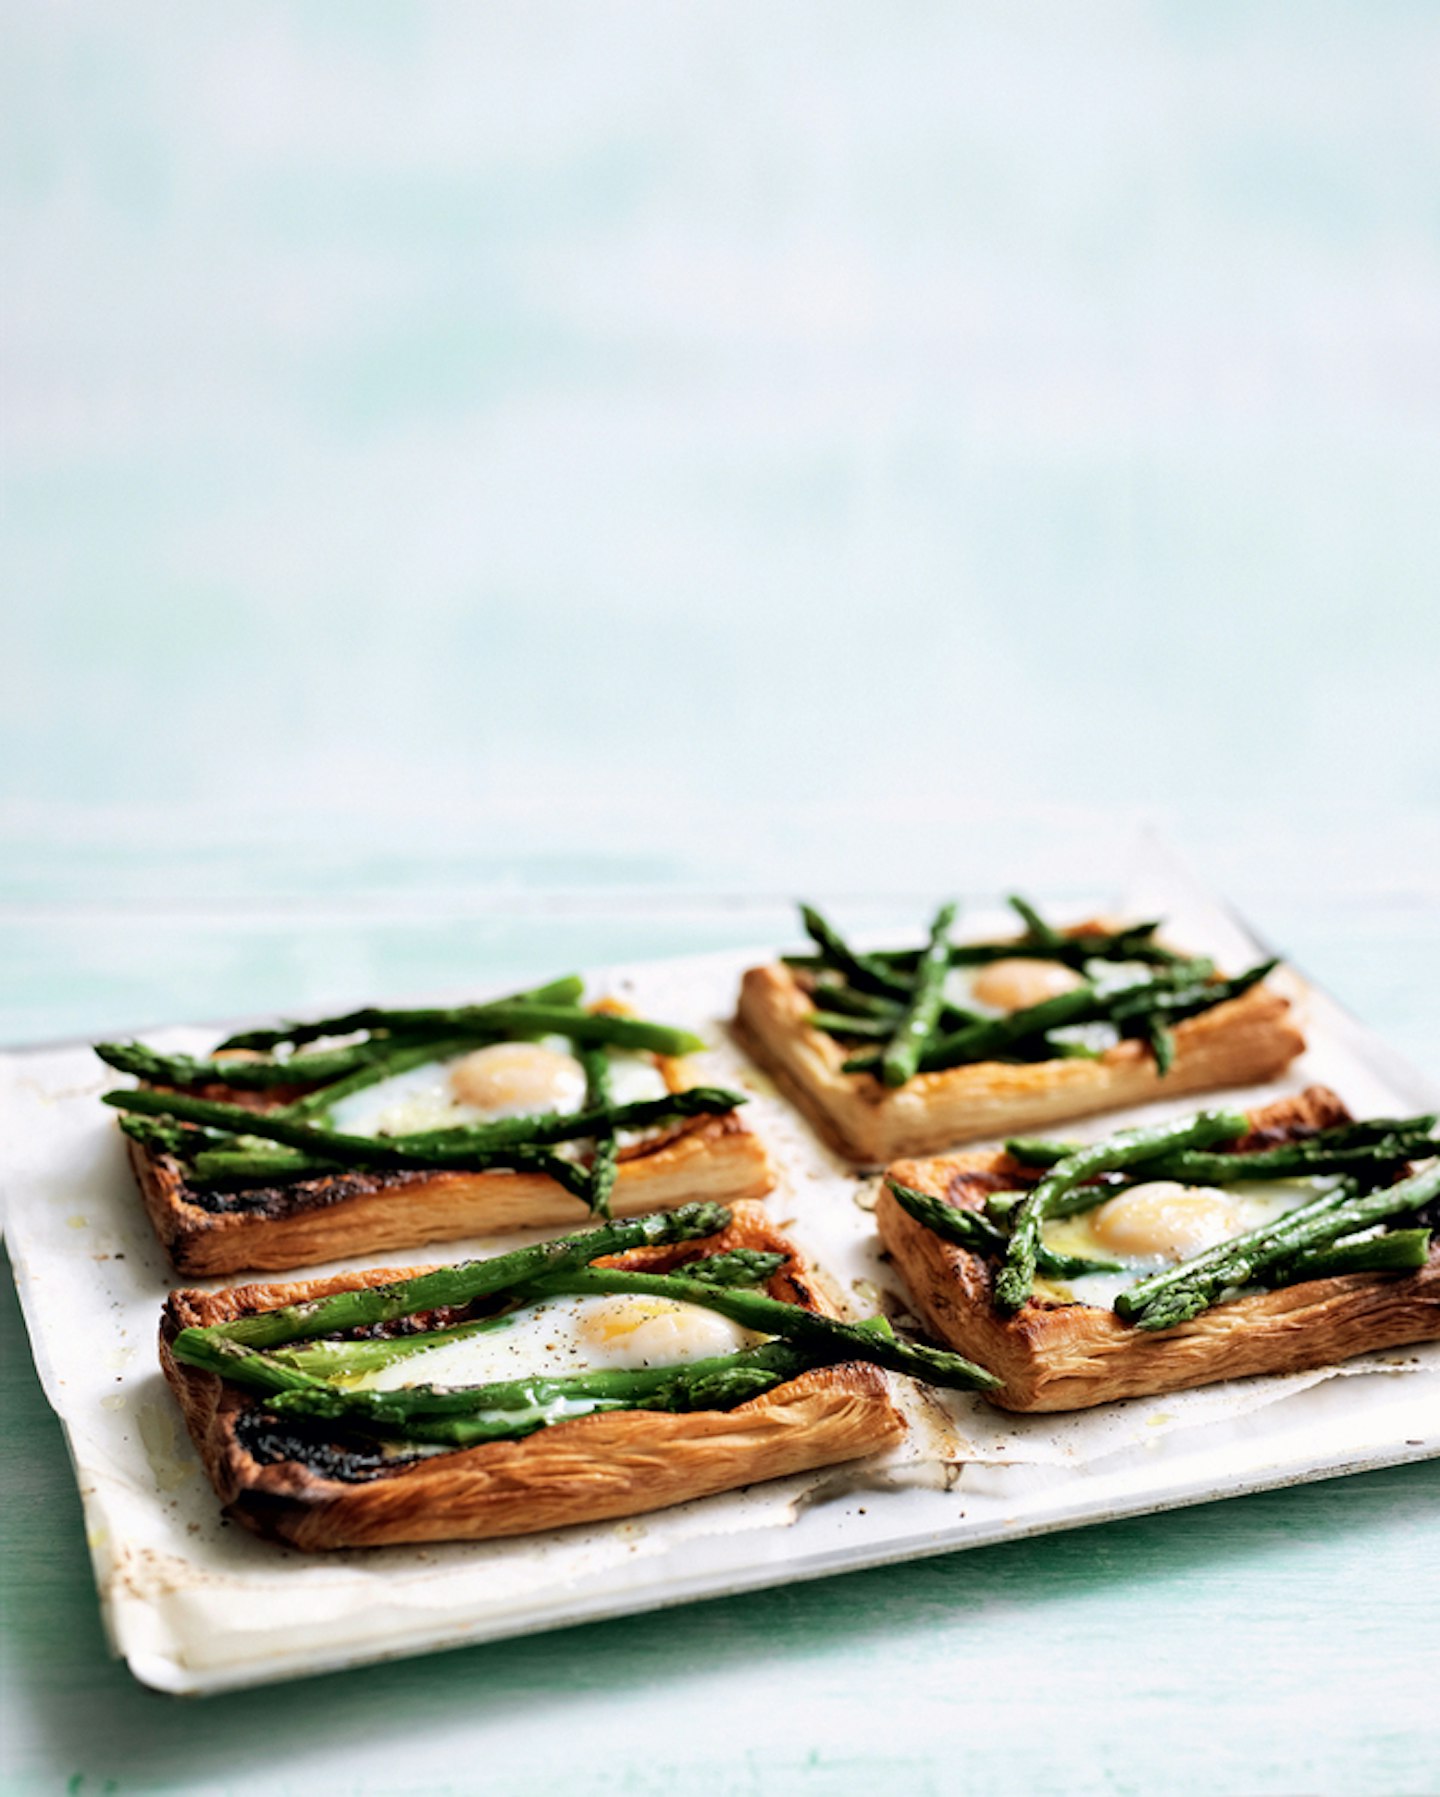 Asparagus and egg pastries